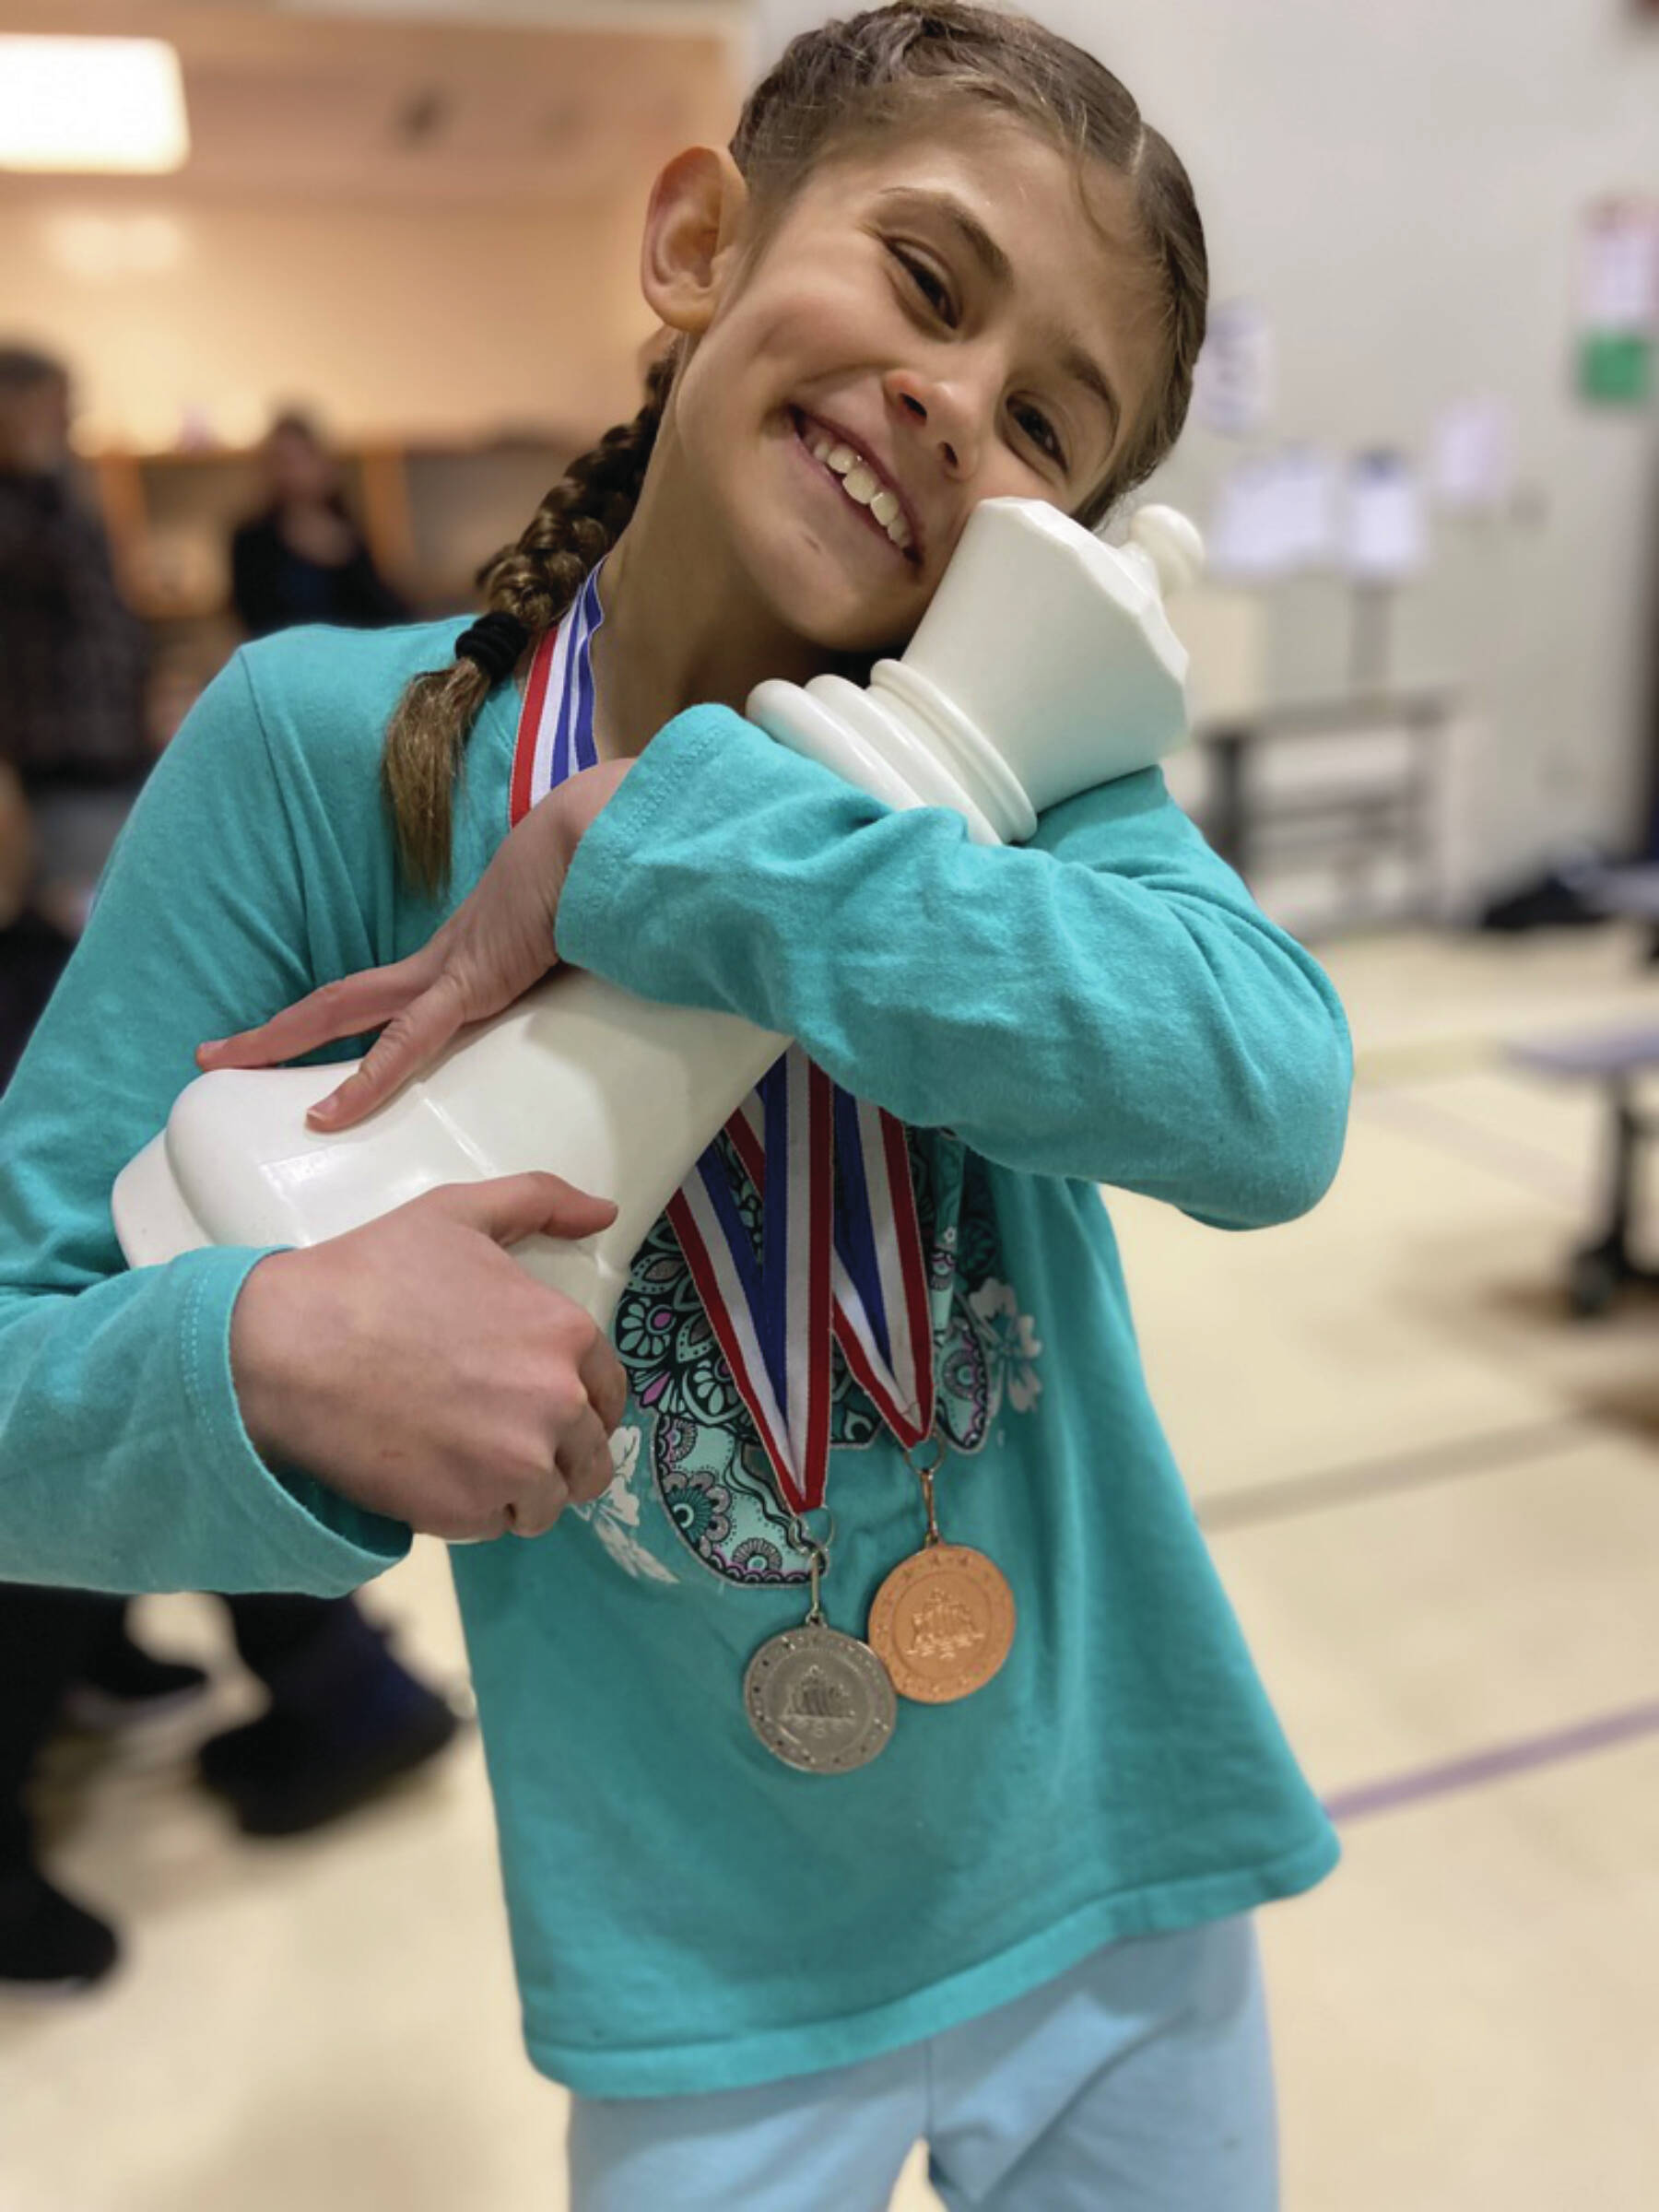 Photo provided by Andy Haas
Evelyn Field embraces a chess piece at the tournament at West Homer Elementary on Monday.